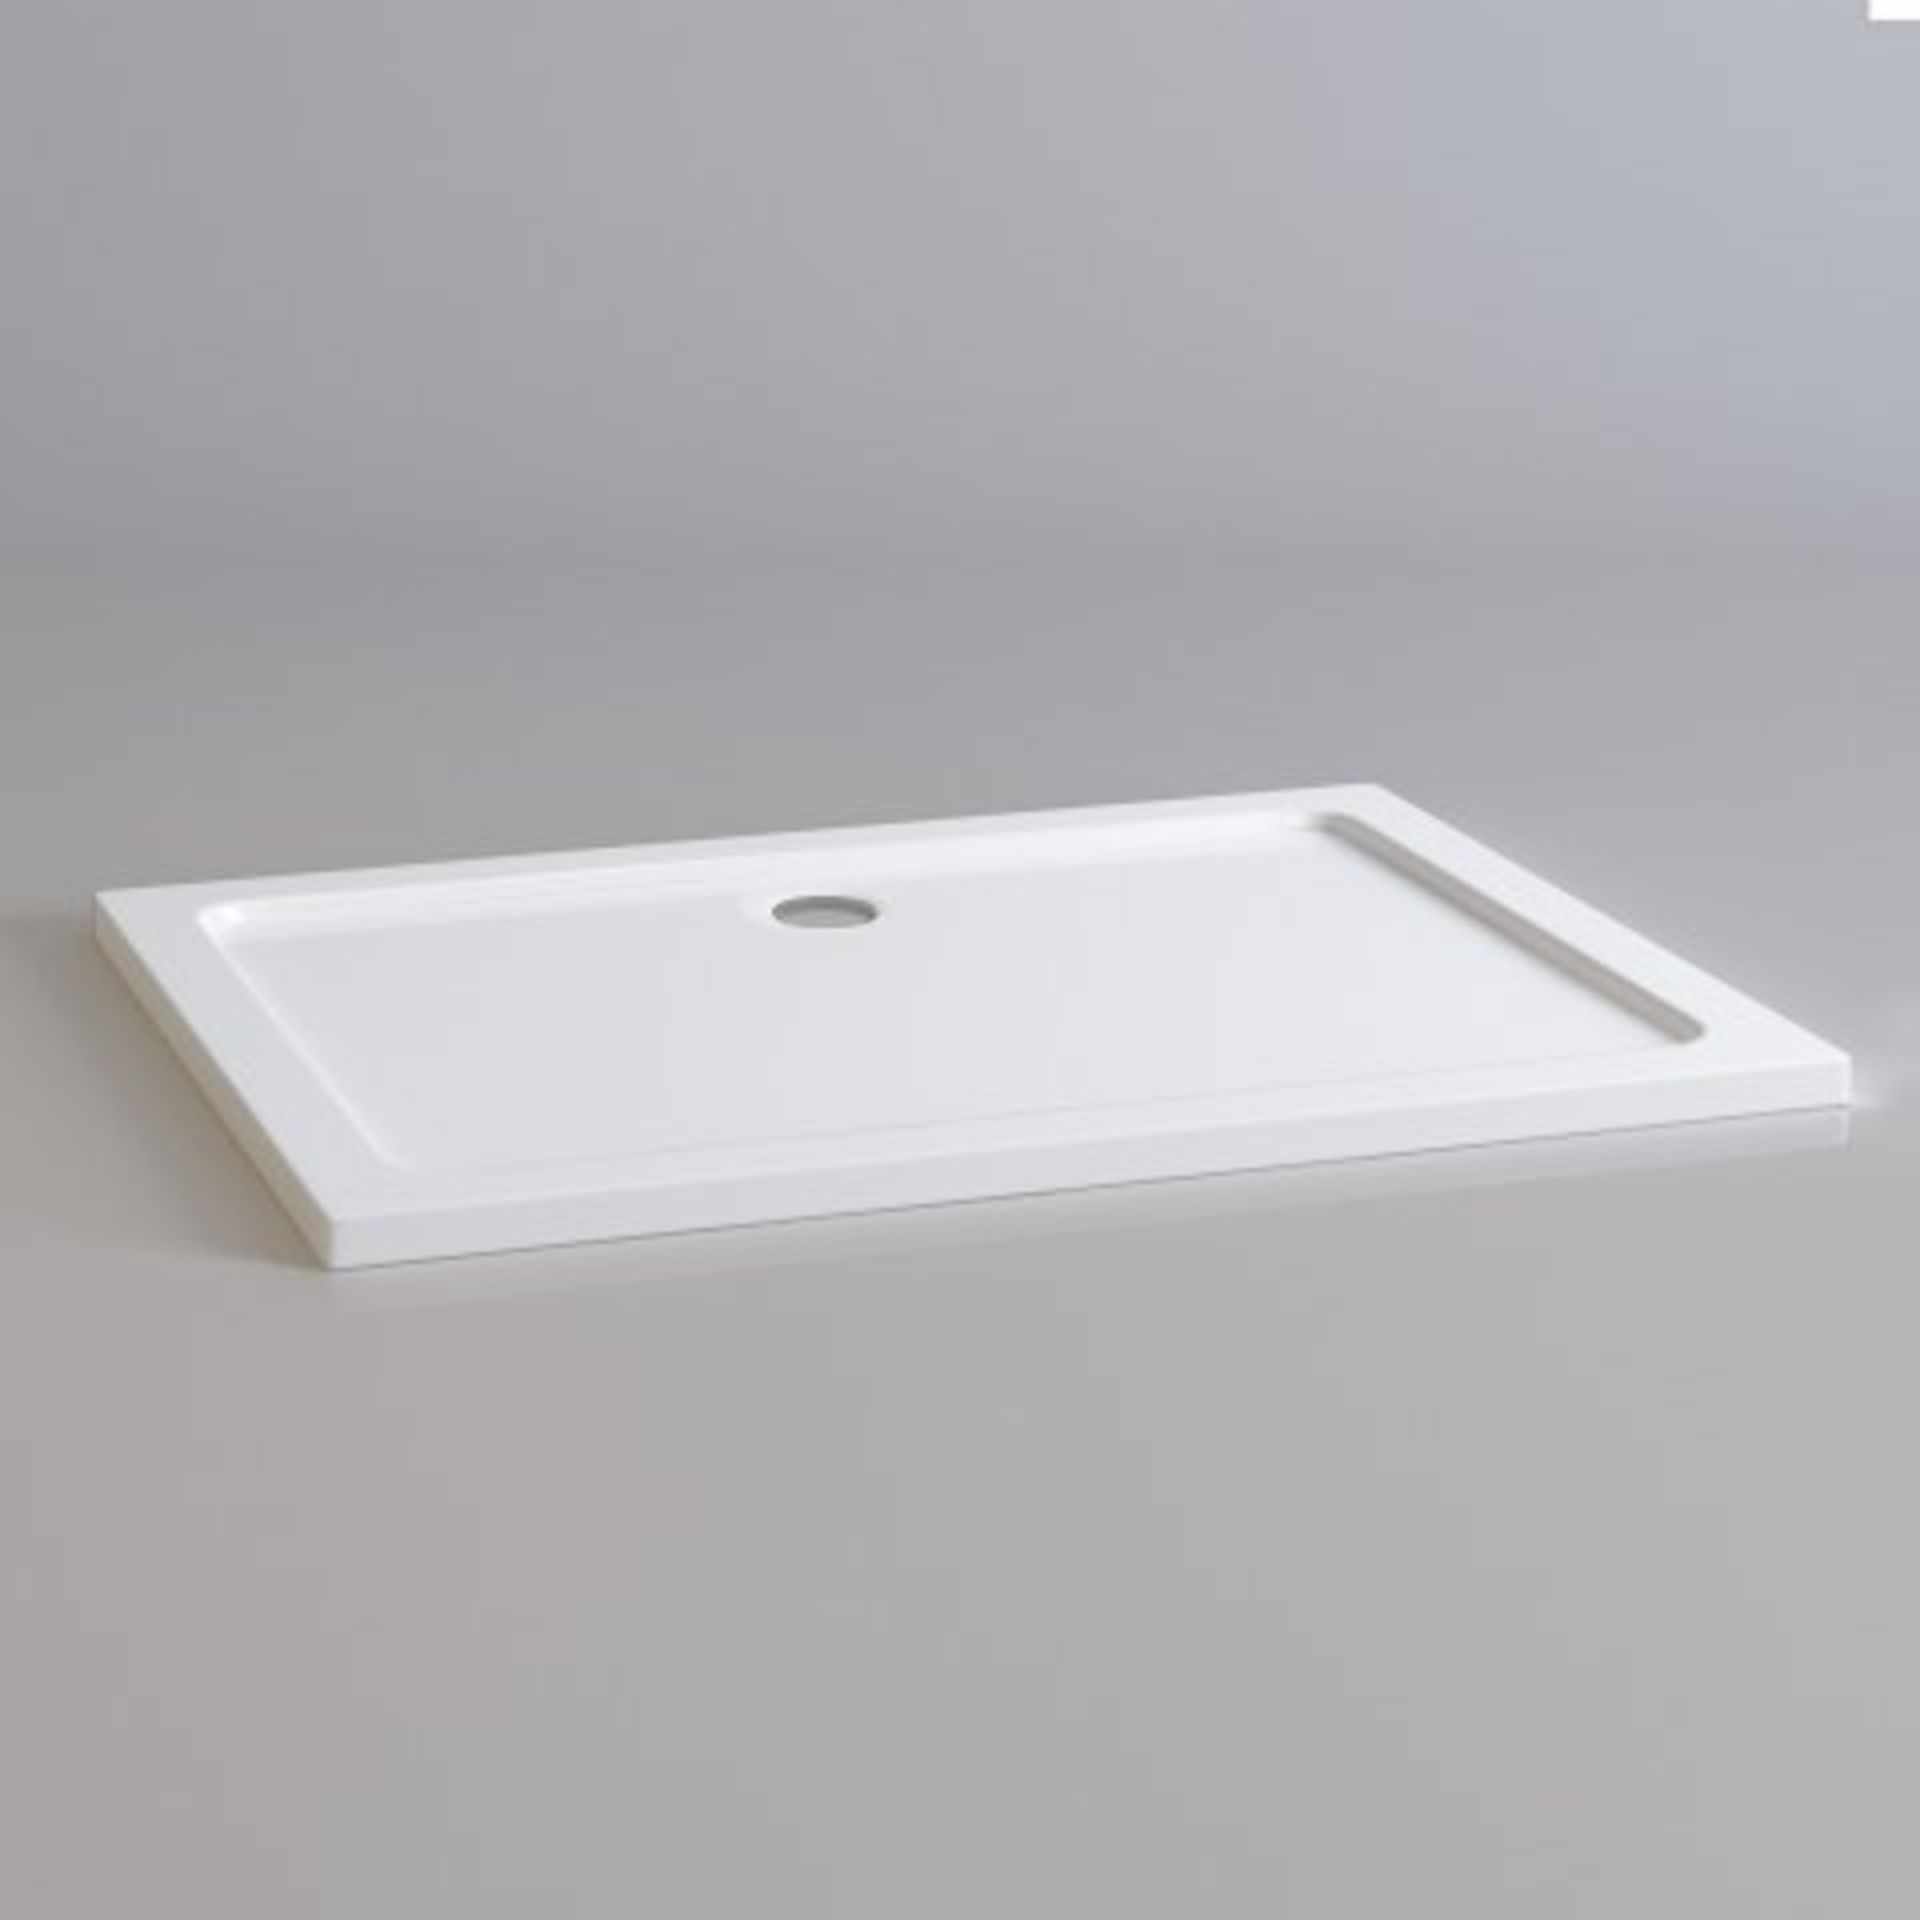 BRAND NEW 1200x800mm Rectangular Ultra Slim Stone Shower Tray.RRP £399.99.Our brilliant white - Image 2 of 2